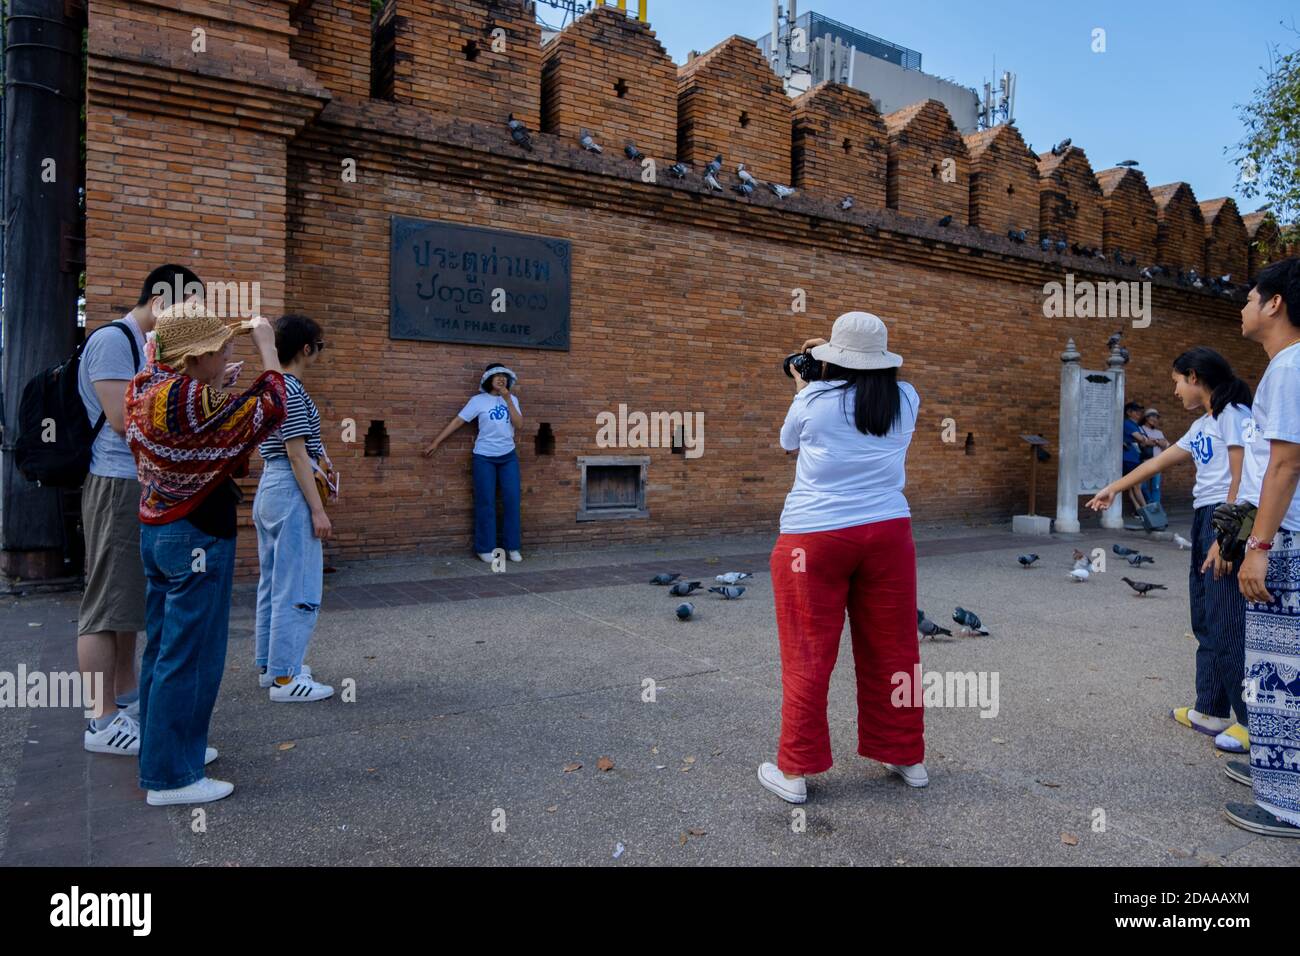 Thailand; Jan 2020: Group of tourists taking pictures at the entrance of the Old Town. Ancient brick wall. Chiang Mai, Thailand, Southeast Asia Stock Photo